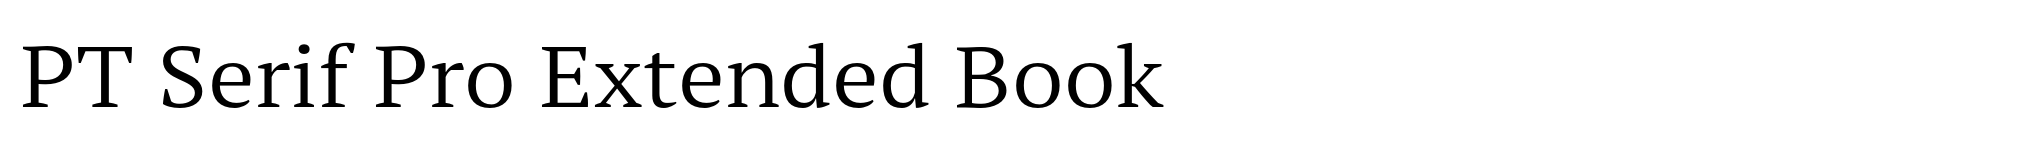 PT Serif Pro Extended Book image